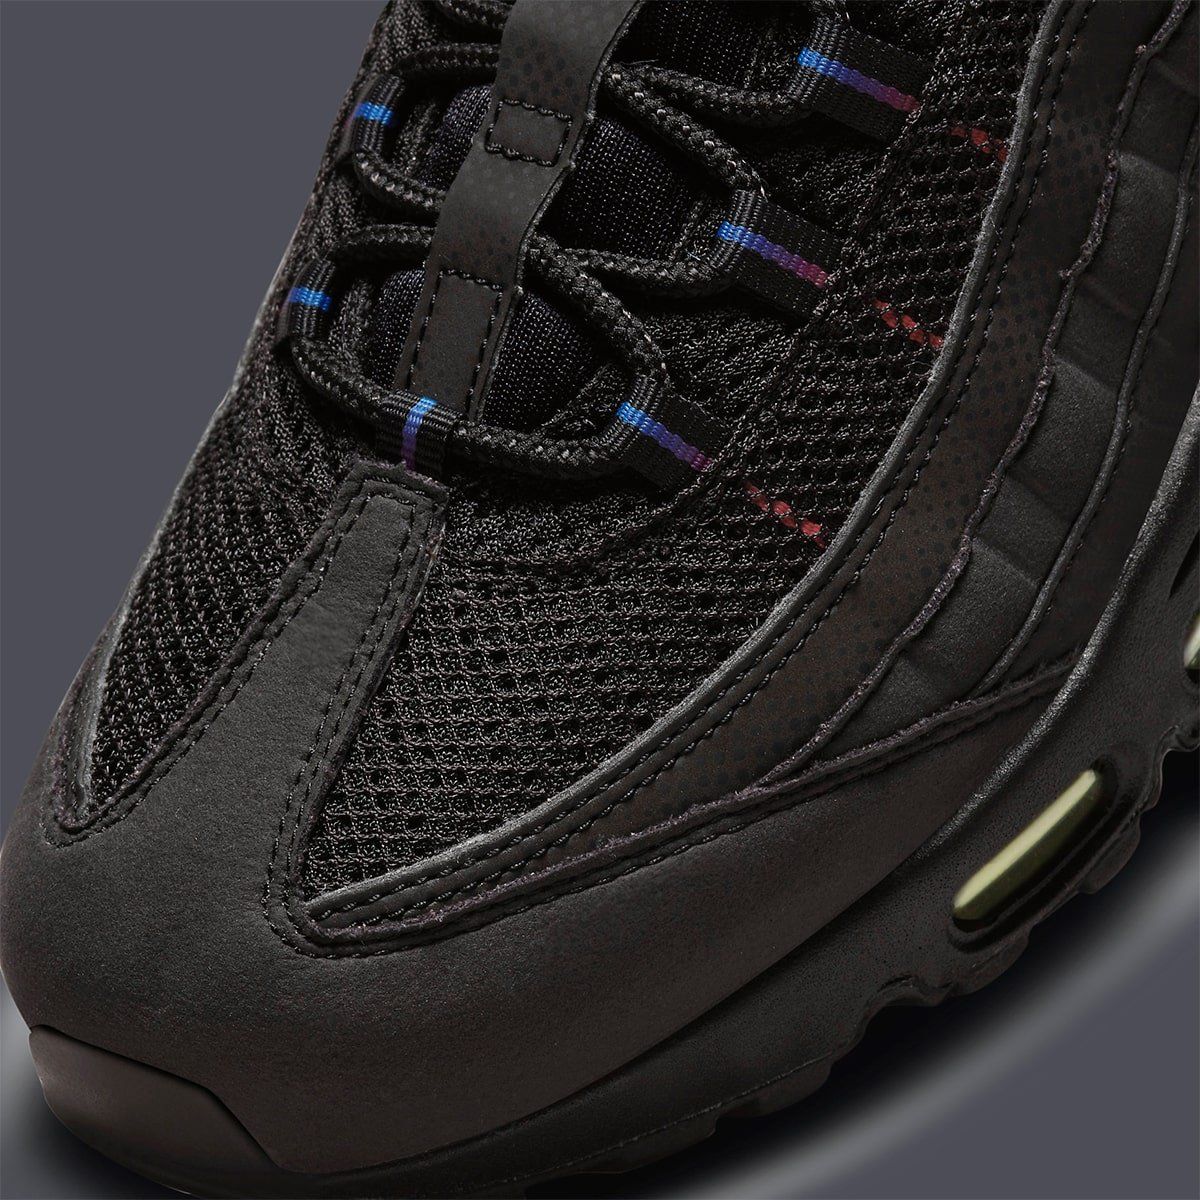 New Nike Air Max 95 Goes Heavy on Reflective Finishes | HOUSE OF HEAT